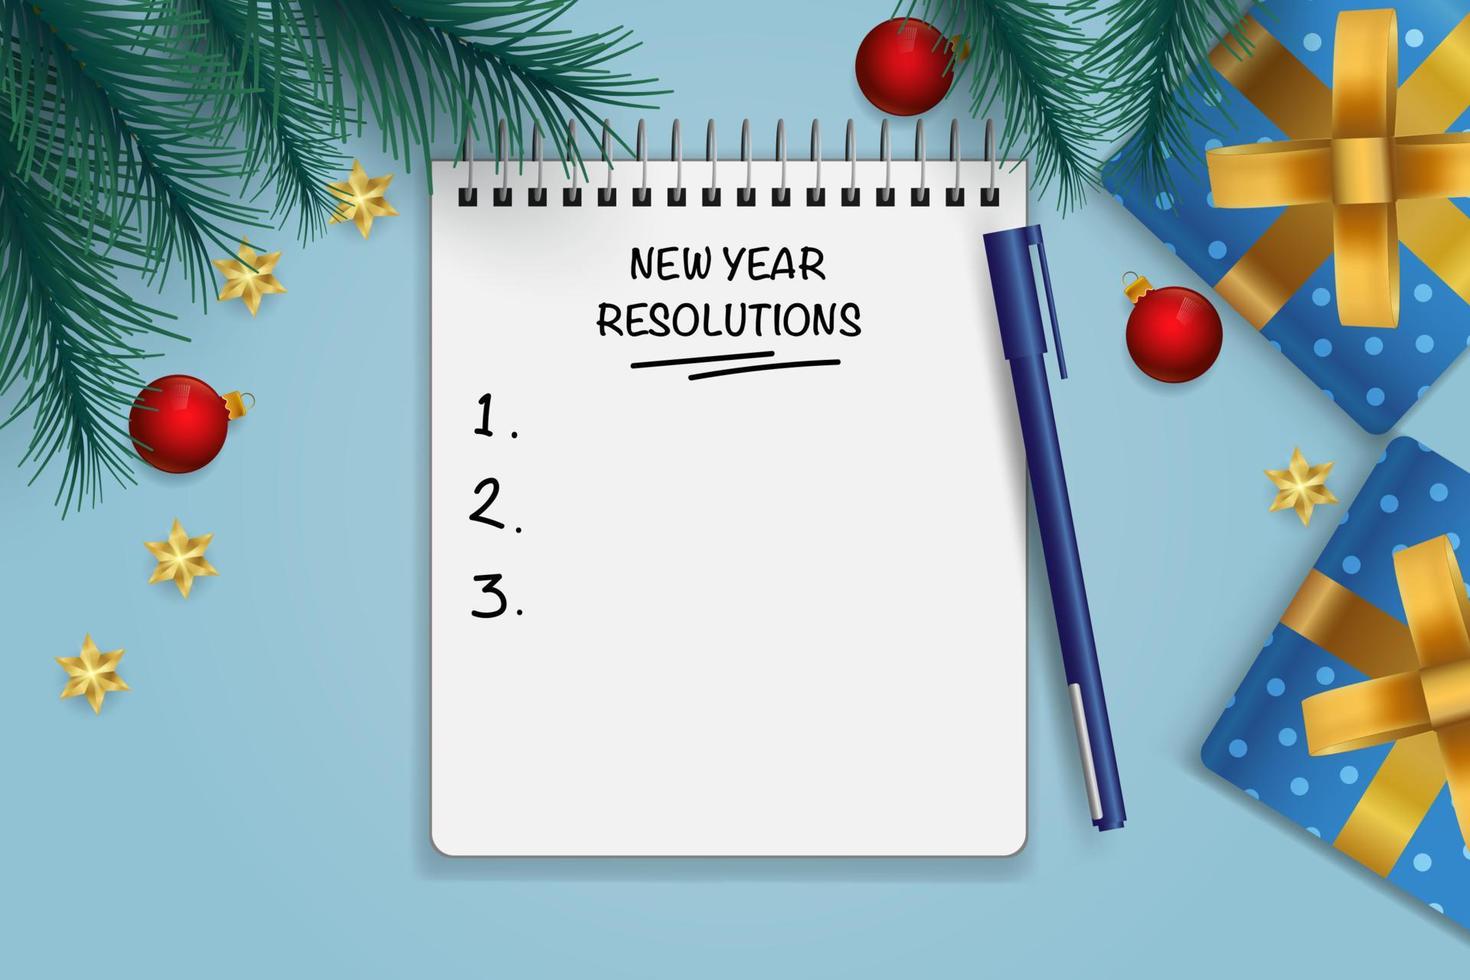 New Year Resolution goal list with Christmas decoration vector